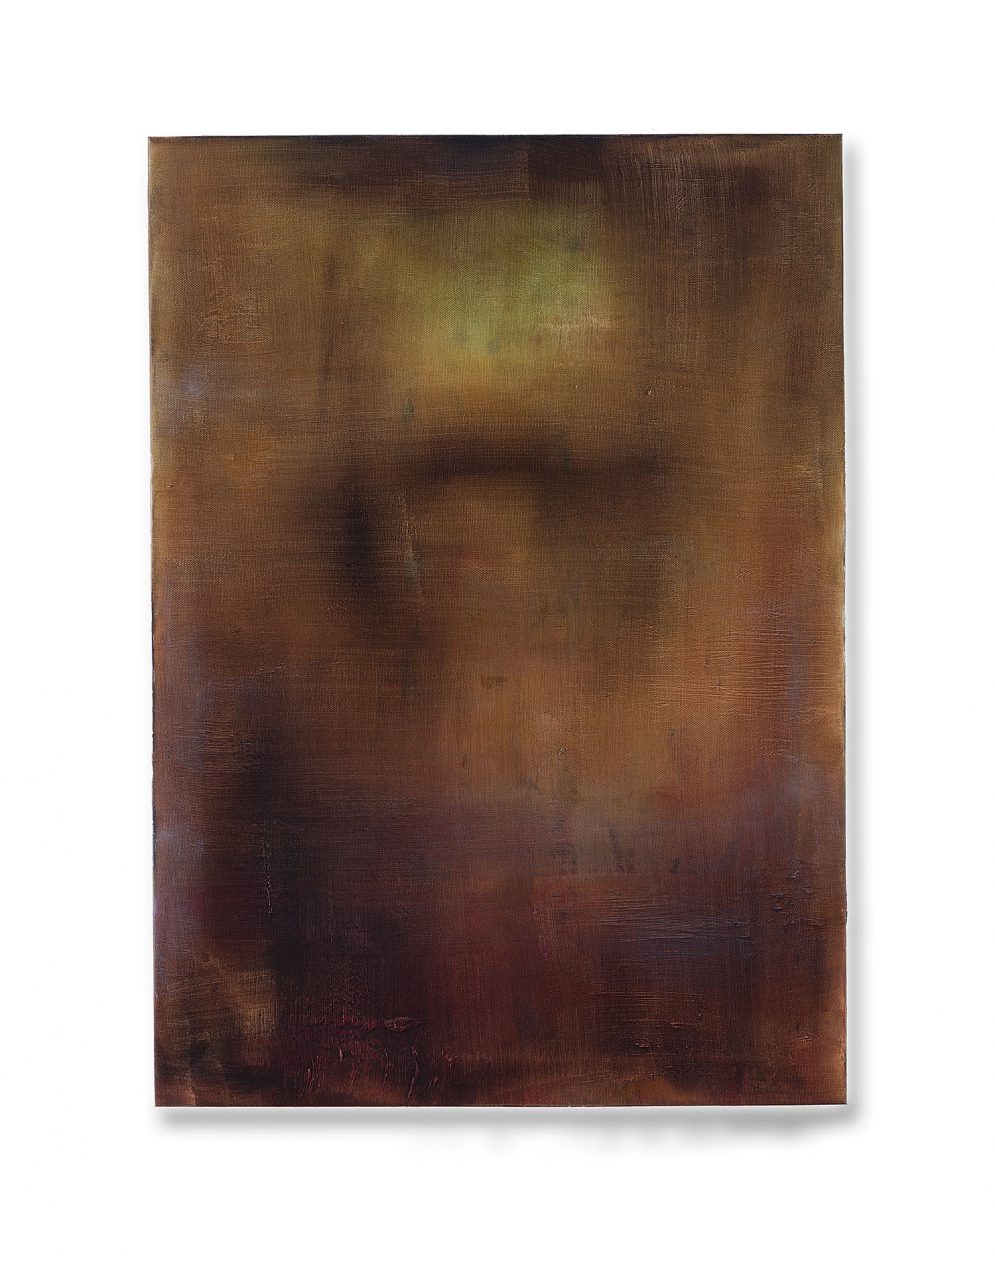 Untitled (climate state LXV), 2010, Oil on canvas, 70 x 45 cm